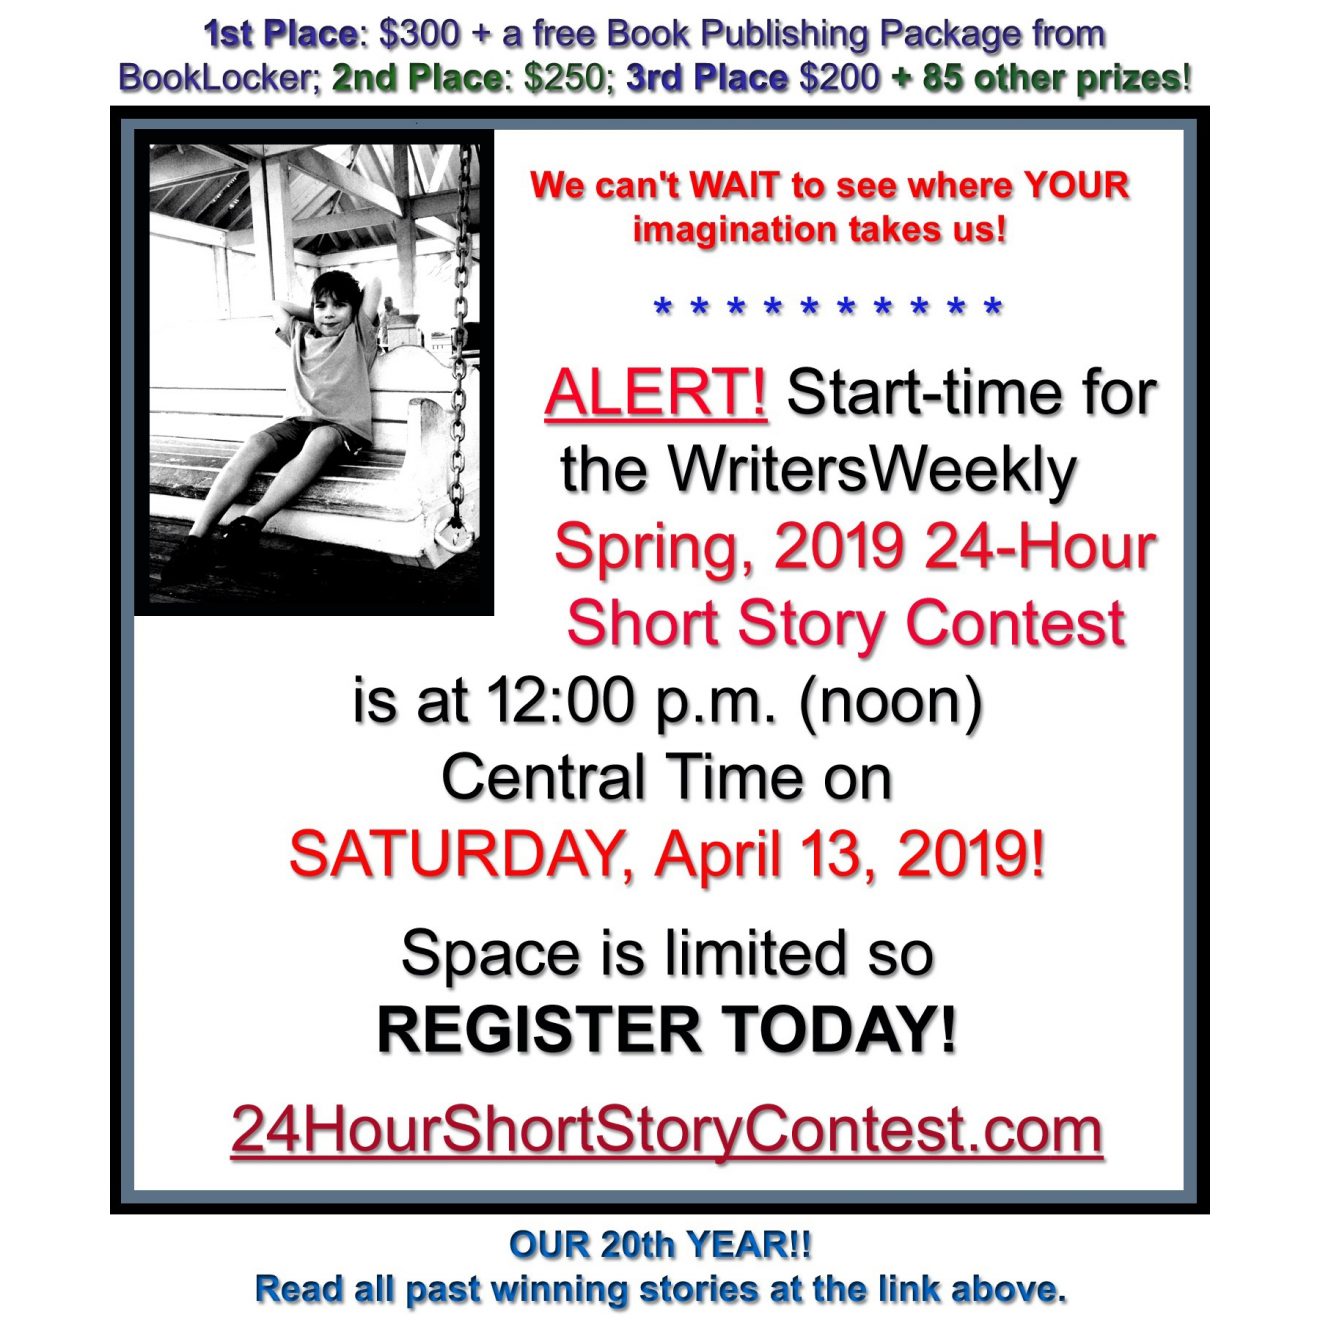 LAST CHANCE! THIS SATURDAY!! What will the Spring, 2019 24-Hour Short Story Contest Topic Be?!?!